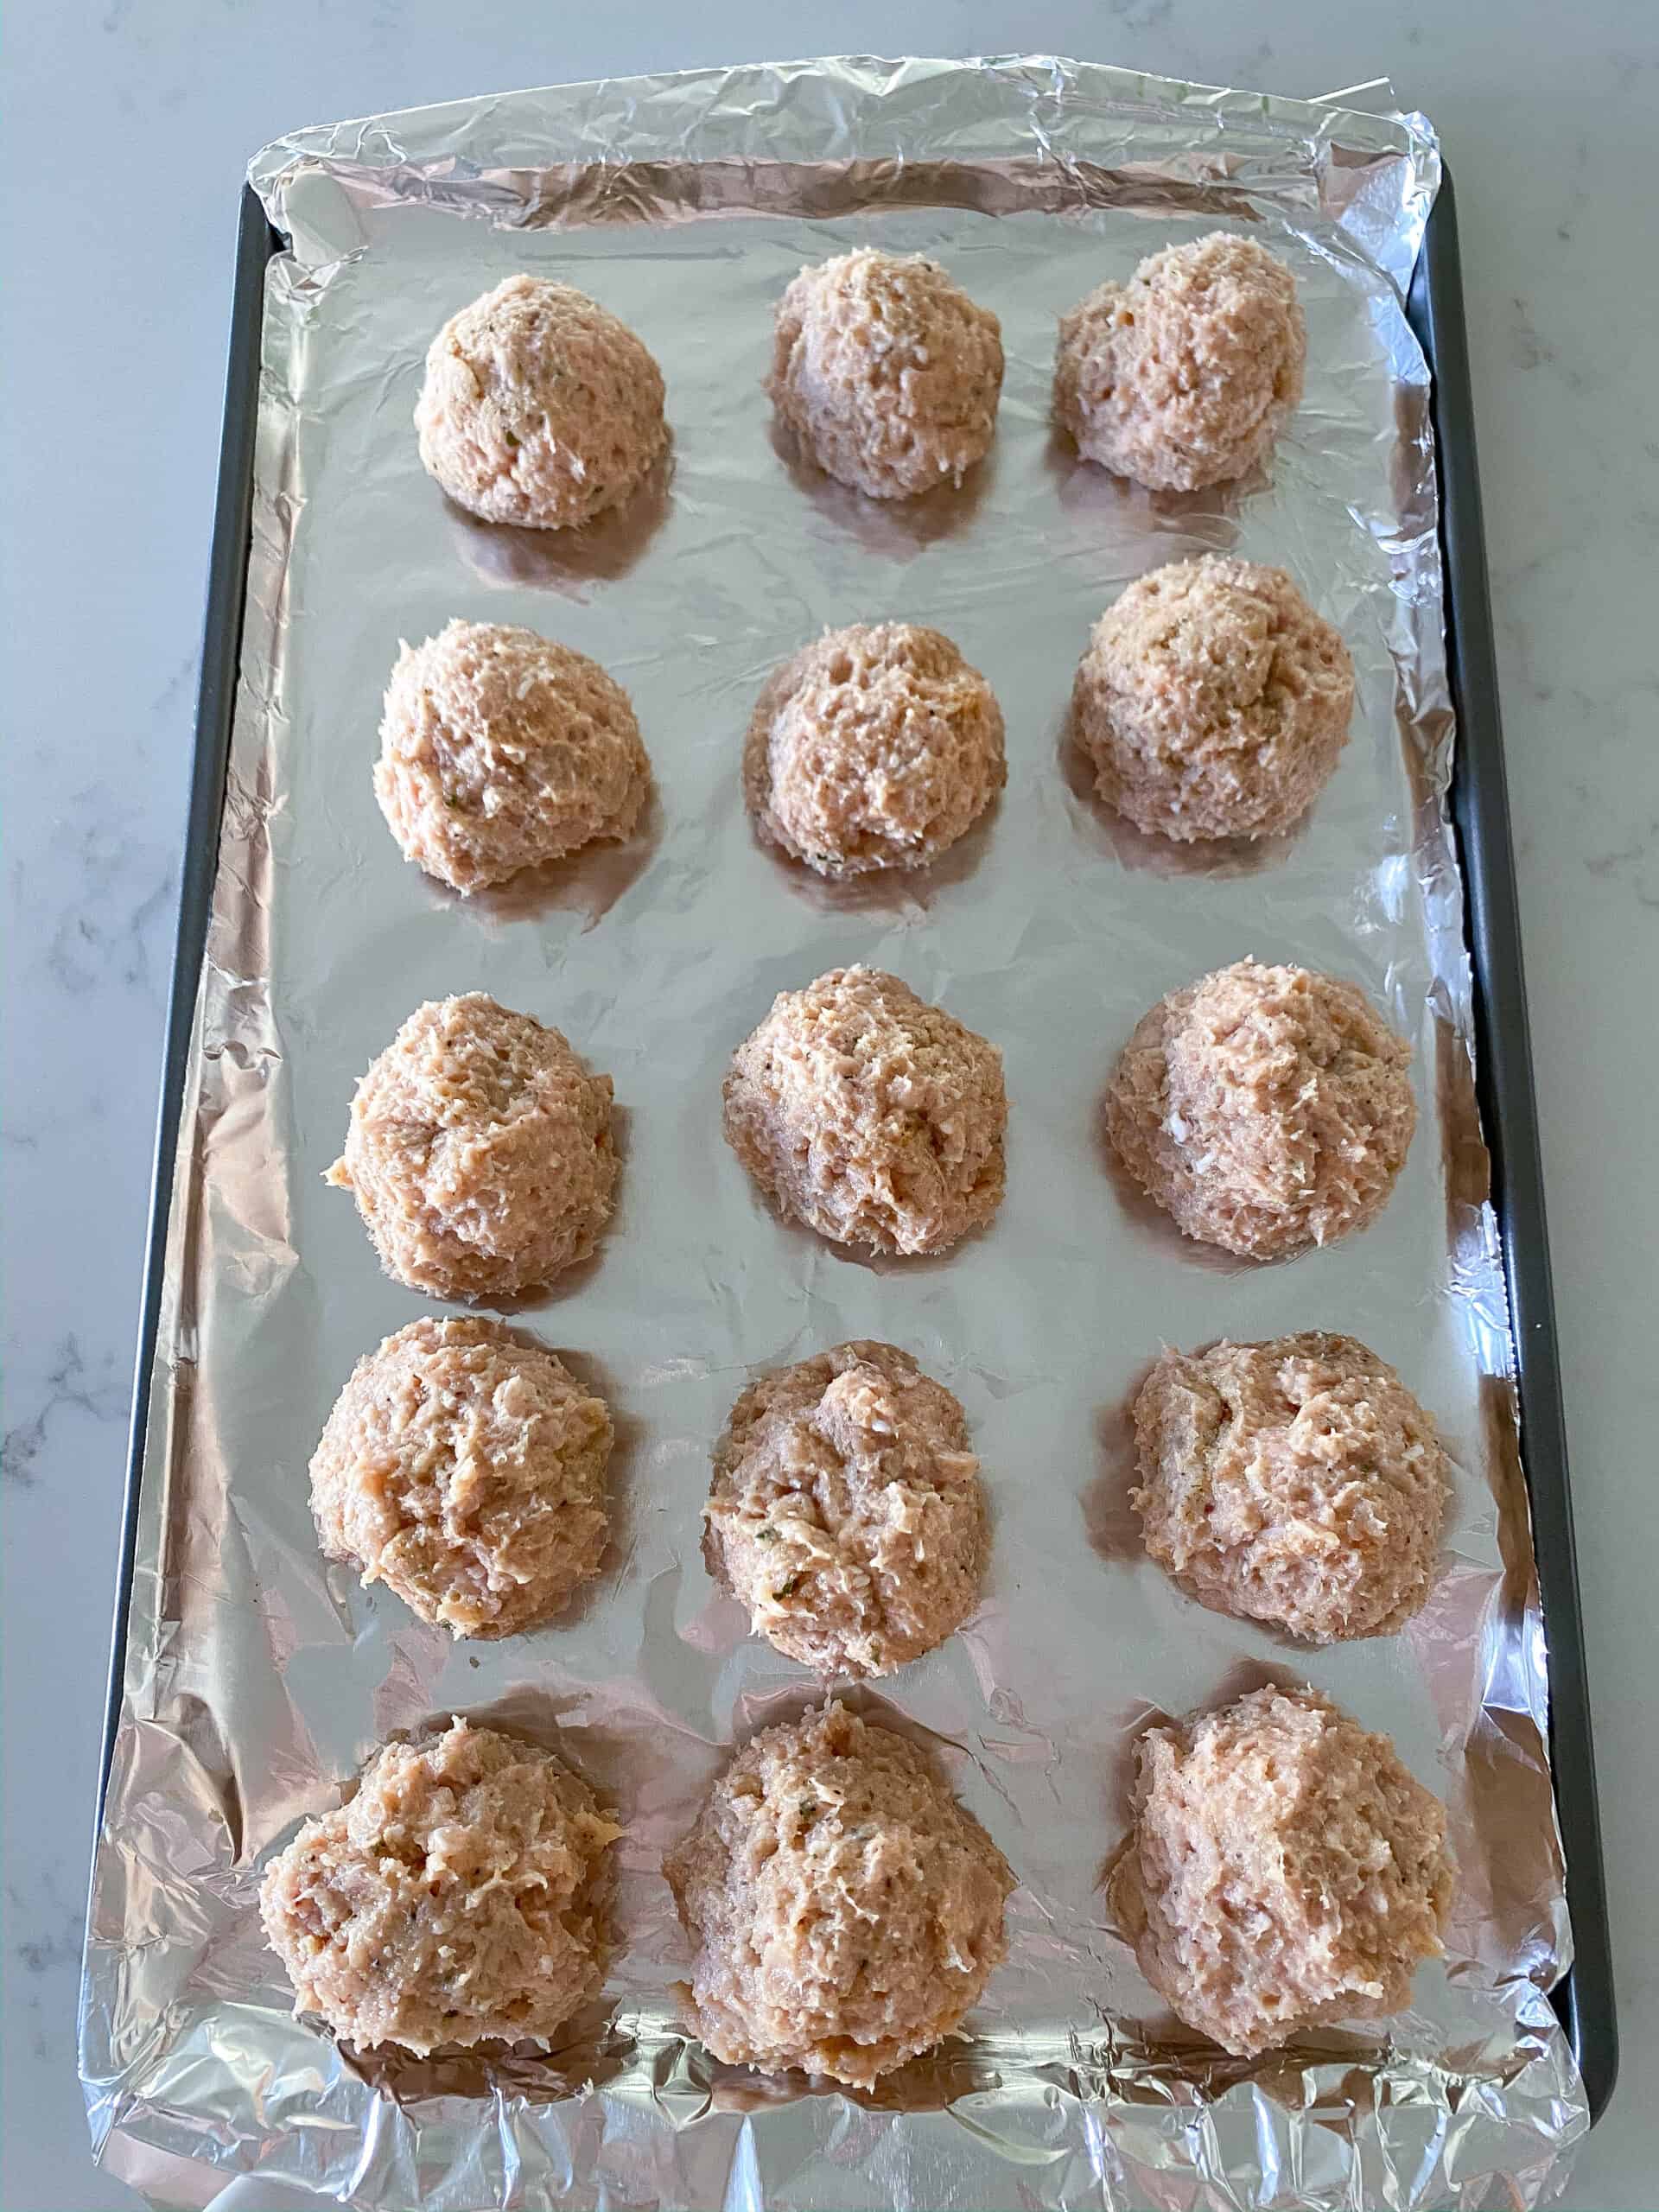 Raw chicken meatballs on a baking sheet ready to be cooked.